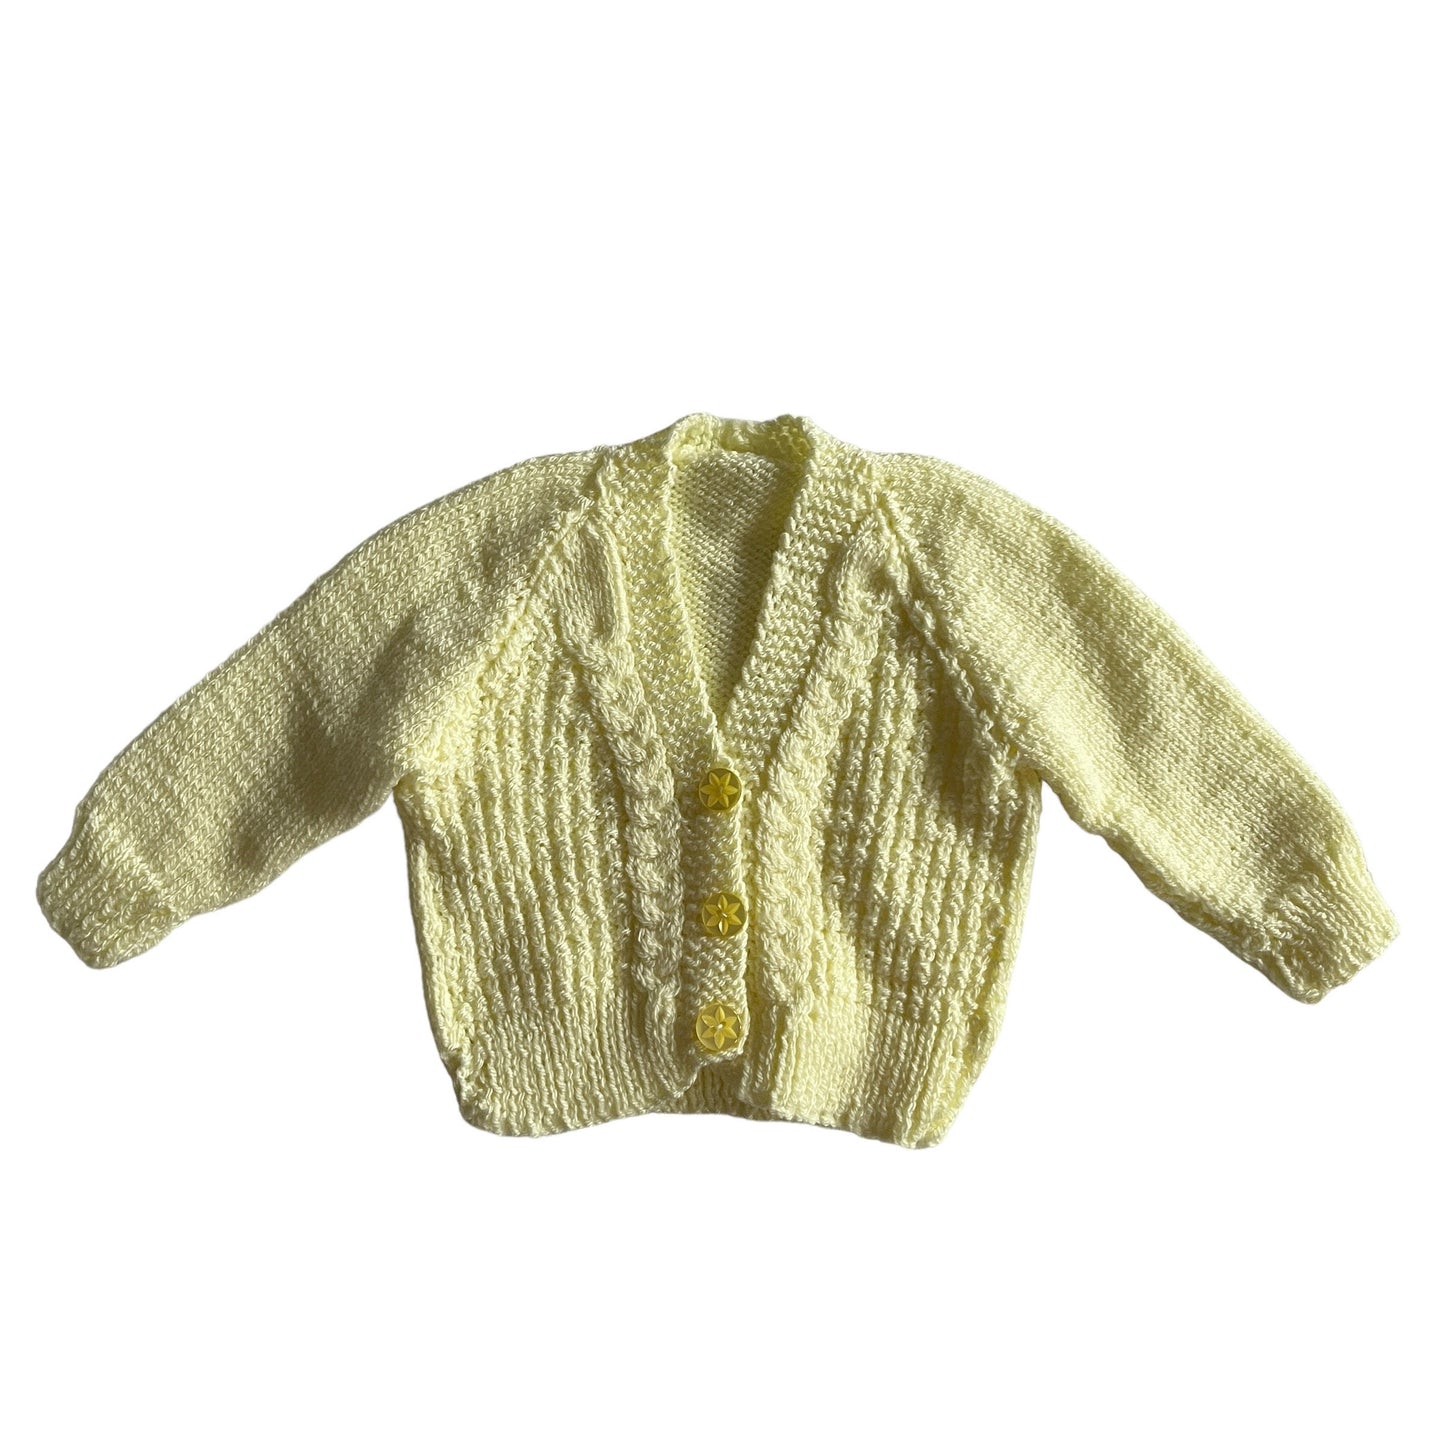 Vintage Yellow Knitted Cardigan 0-6 Months